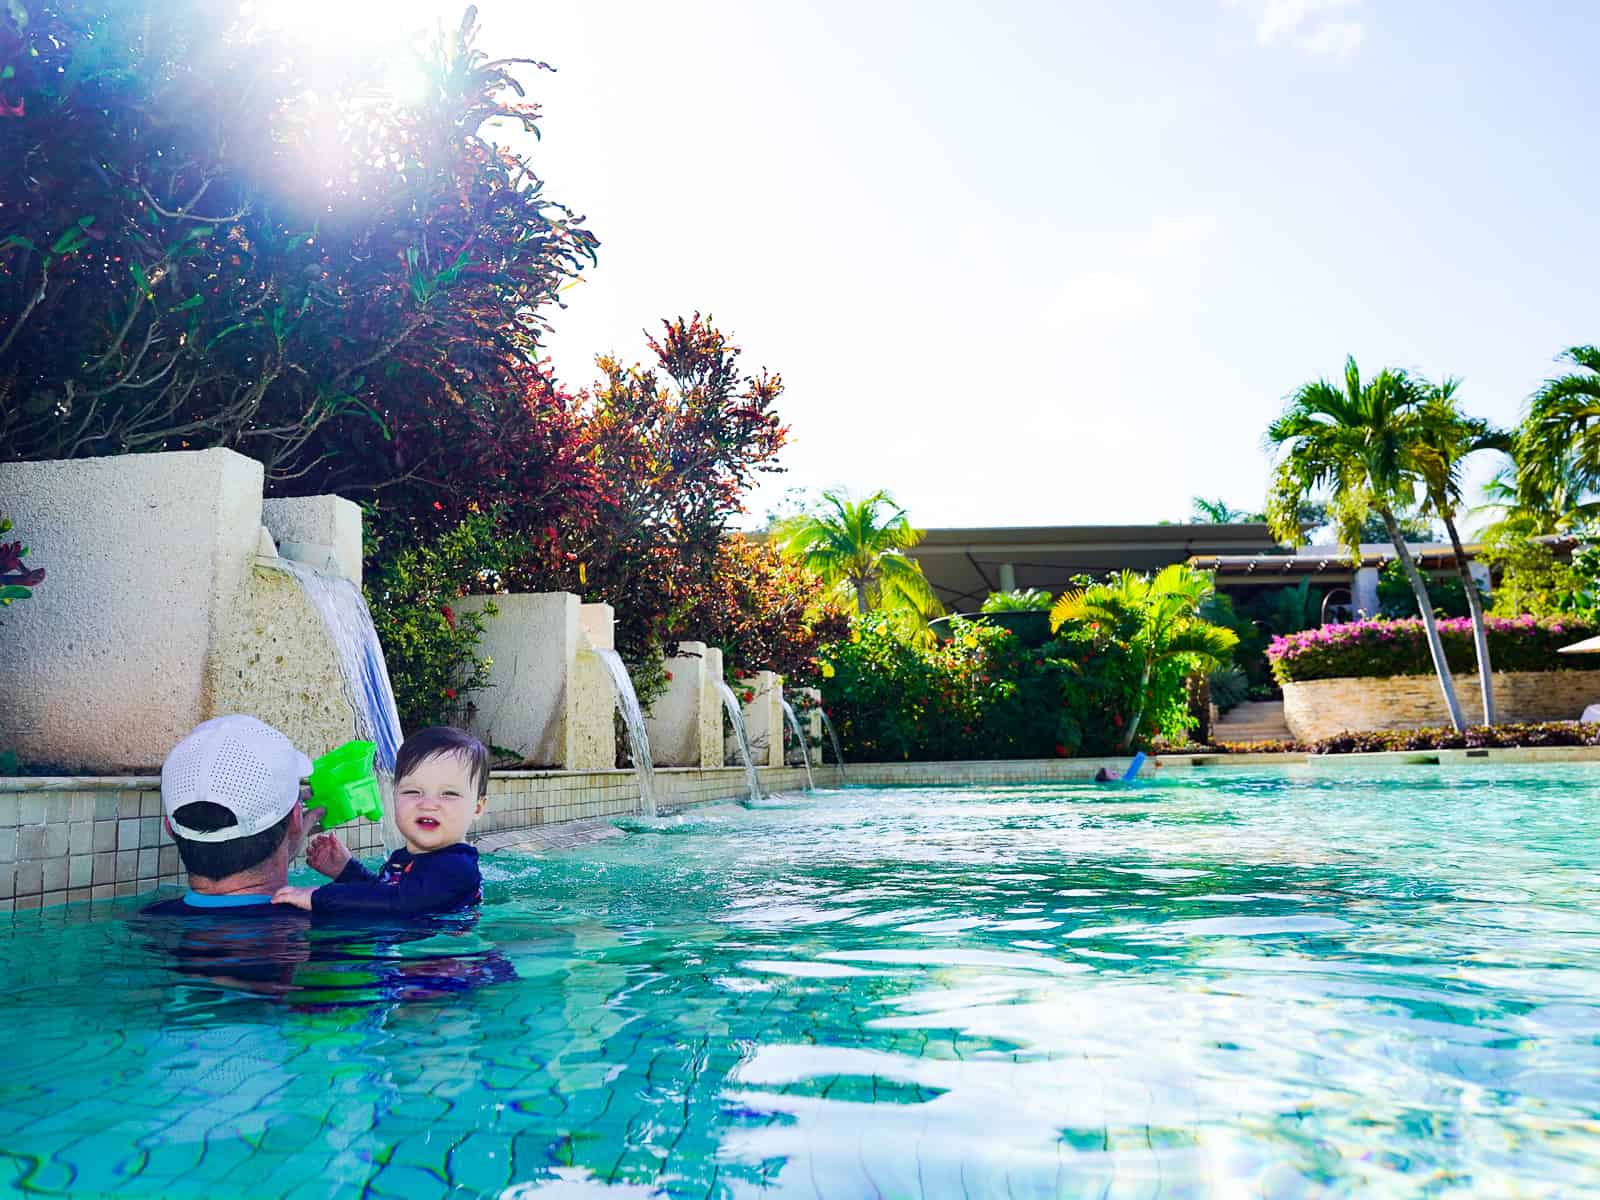 dad in pool with son - rosewood mayakoba luxury family resort